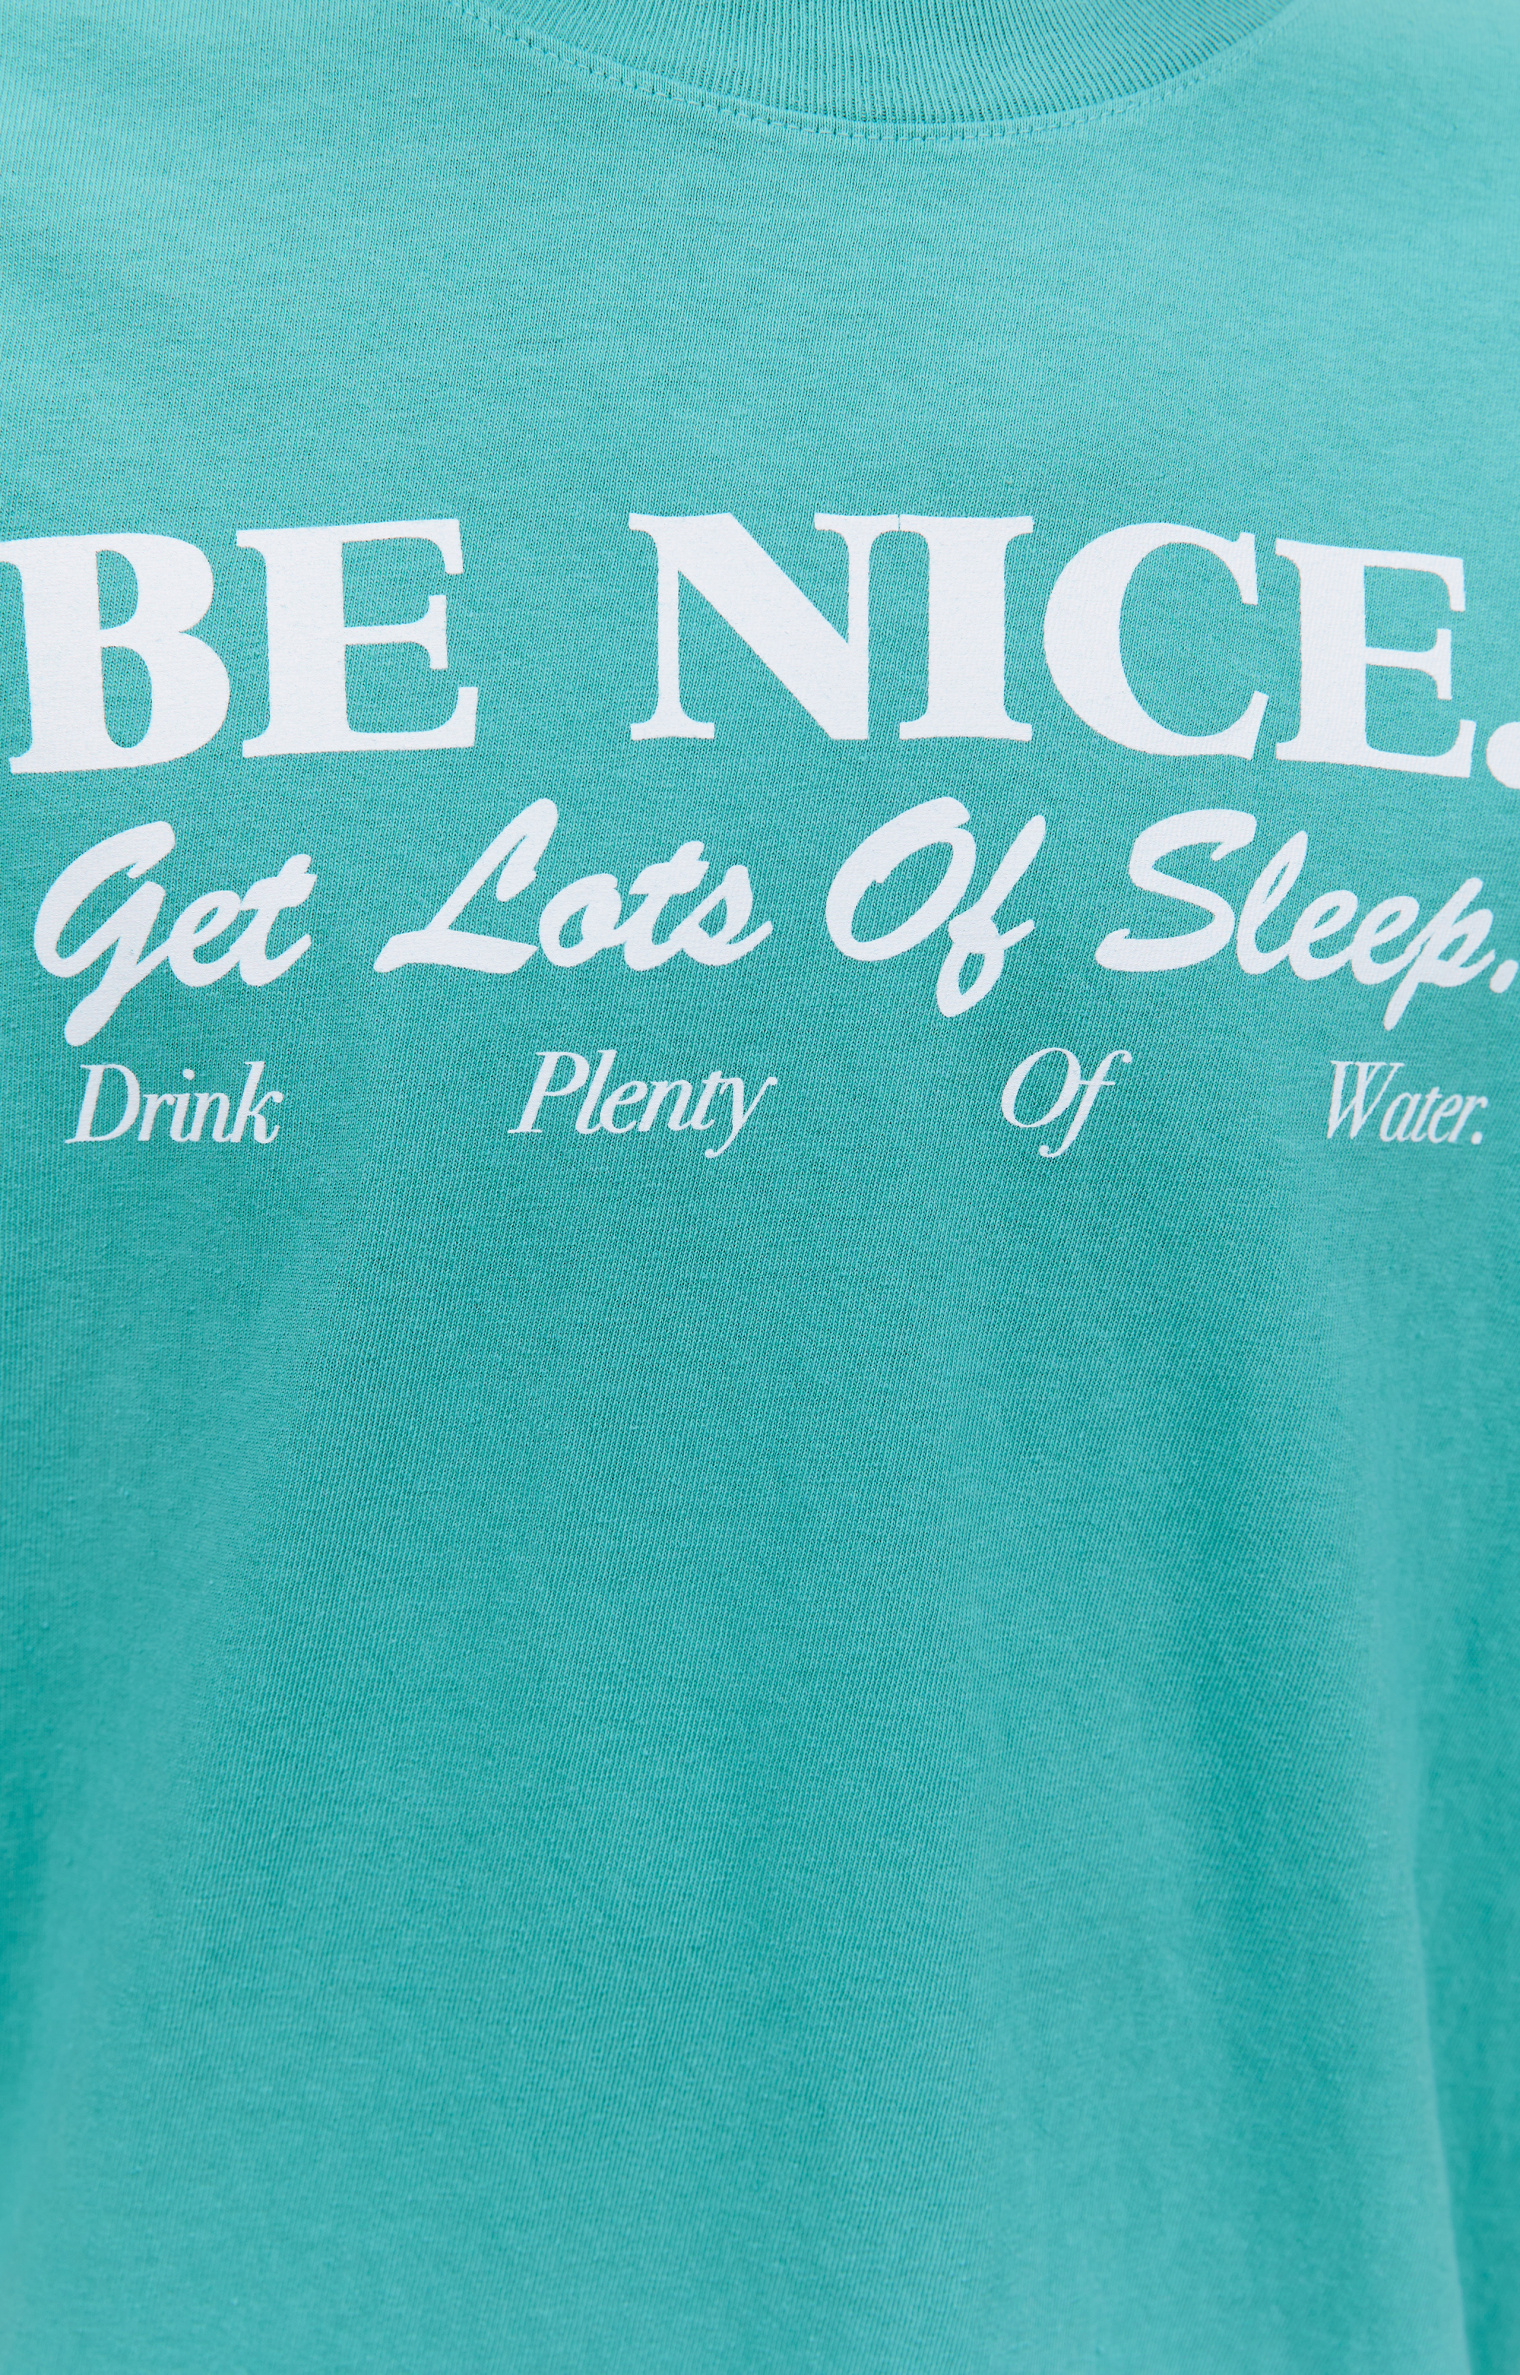 SPORTY & RICH \'Be Nice\' printed t-shirt